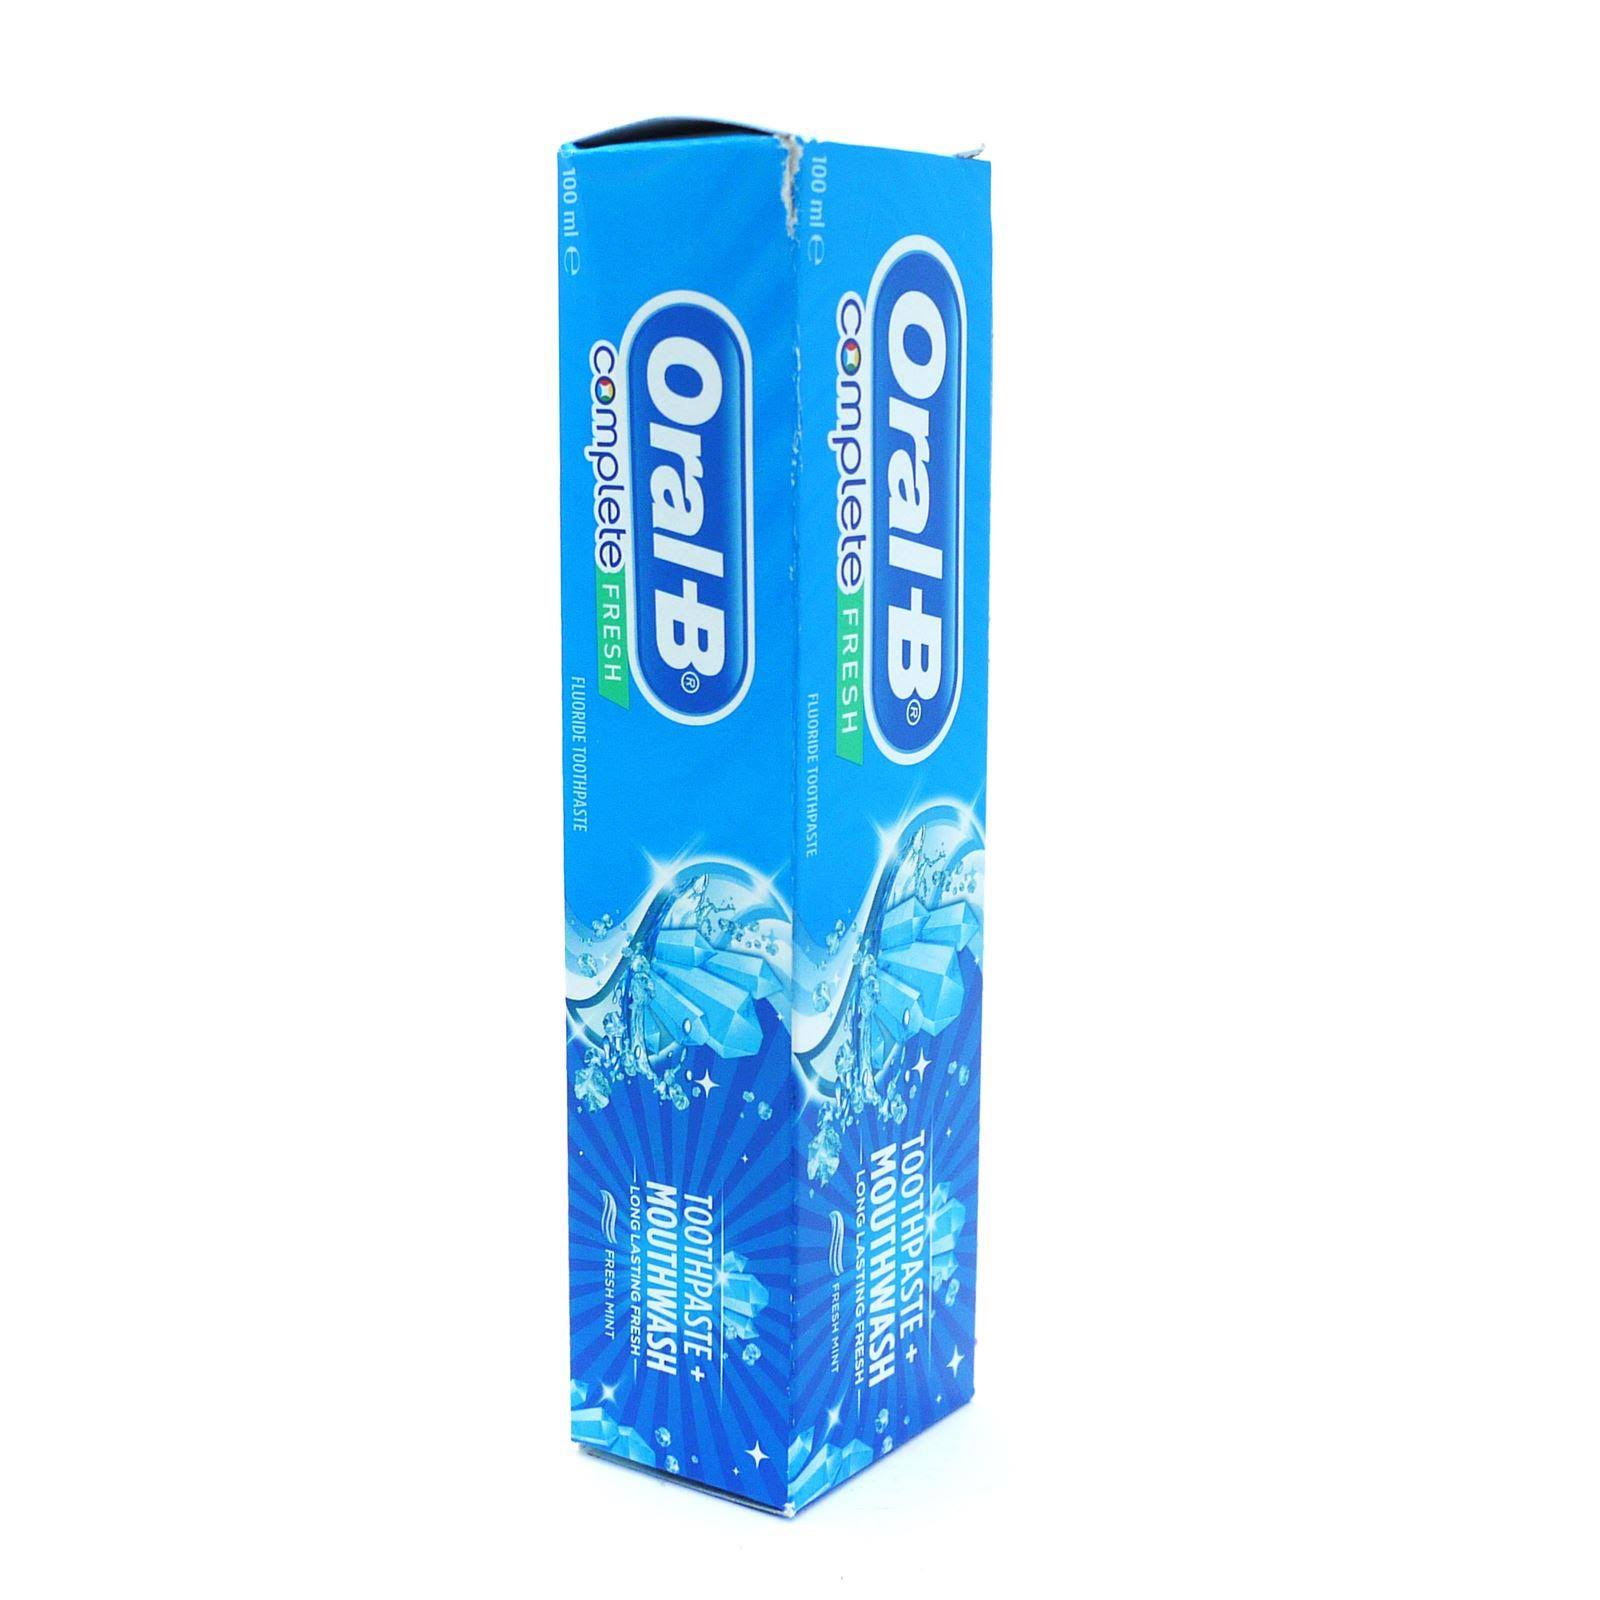 Oral-B Complete Refreshing Clean Toothpaste - 100ml